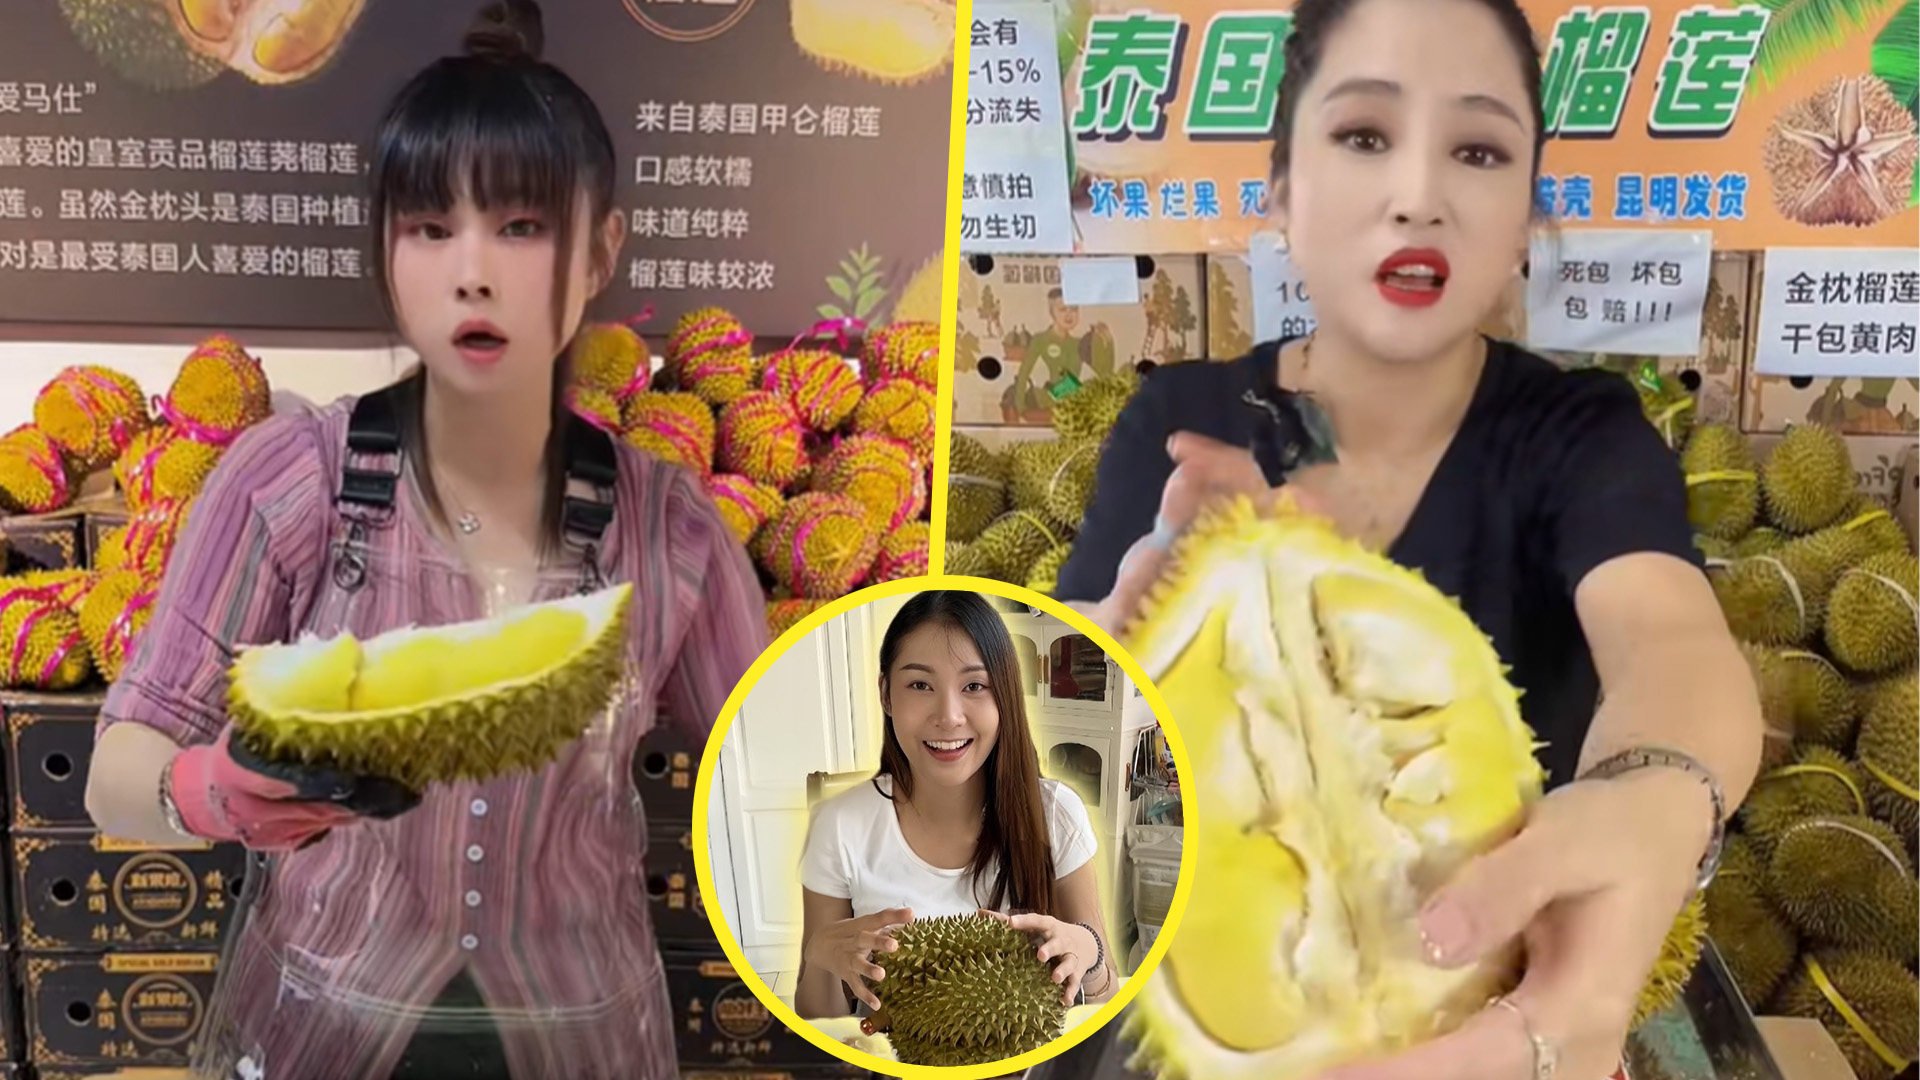 A key opinion leader from Thailand who married a man from China has hailed the skills mainland people display while handling the spiky durian fruit as the “new kung fu”. Photo: SCMP composite/Douyin/YouTube